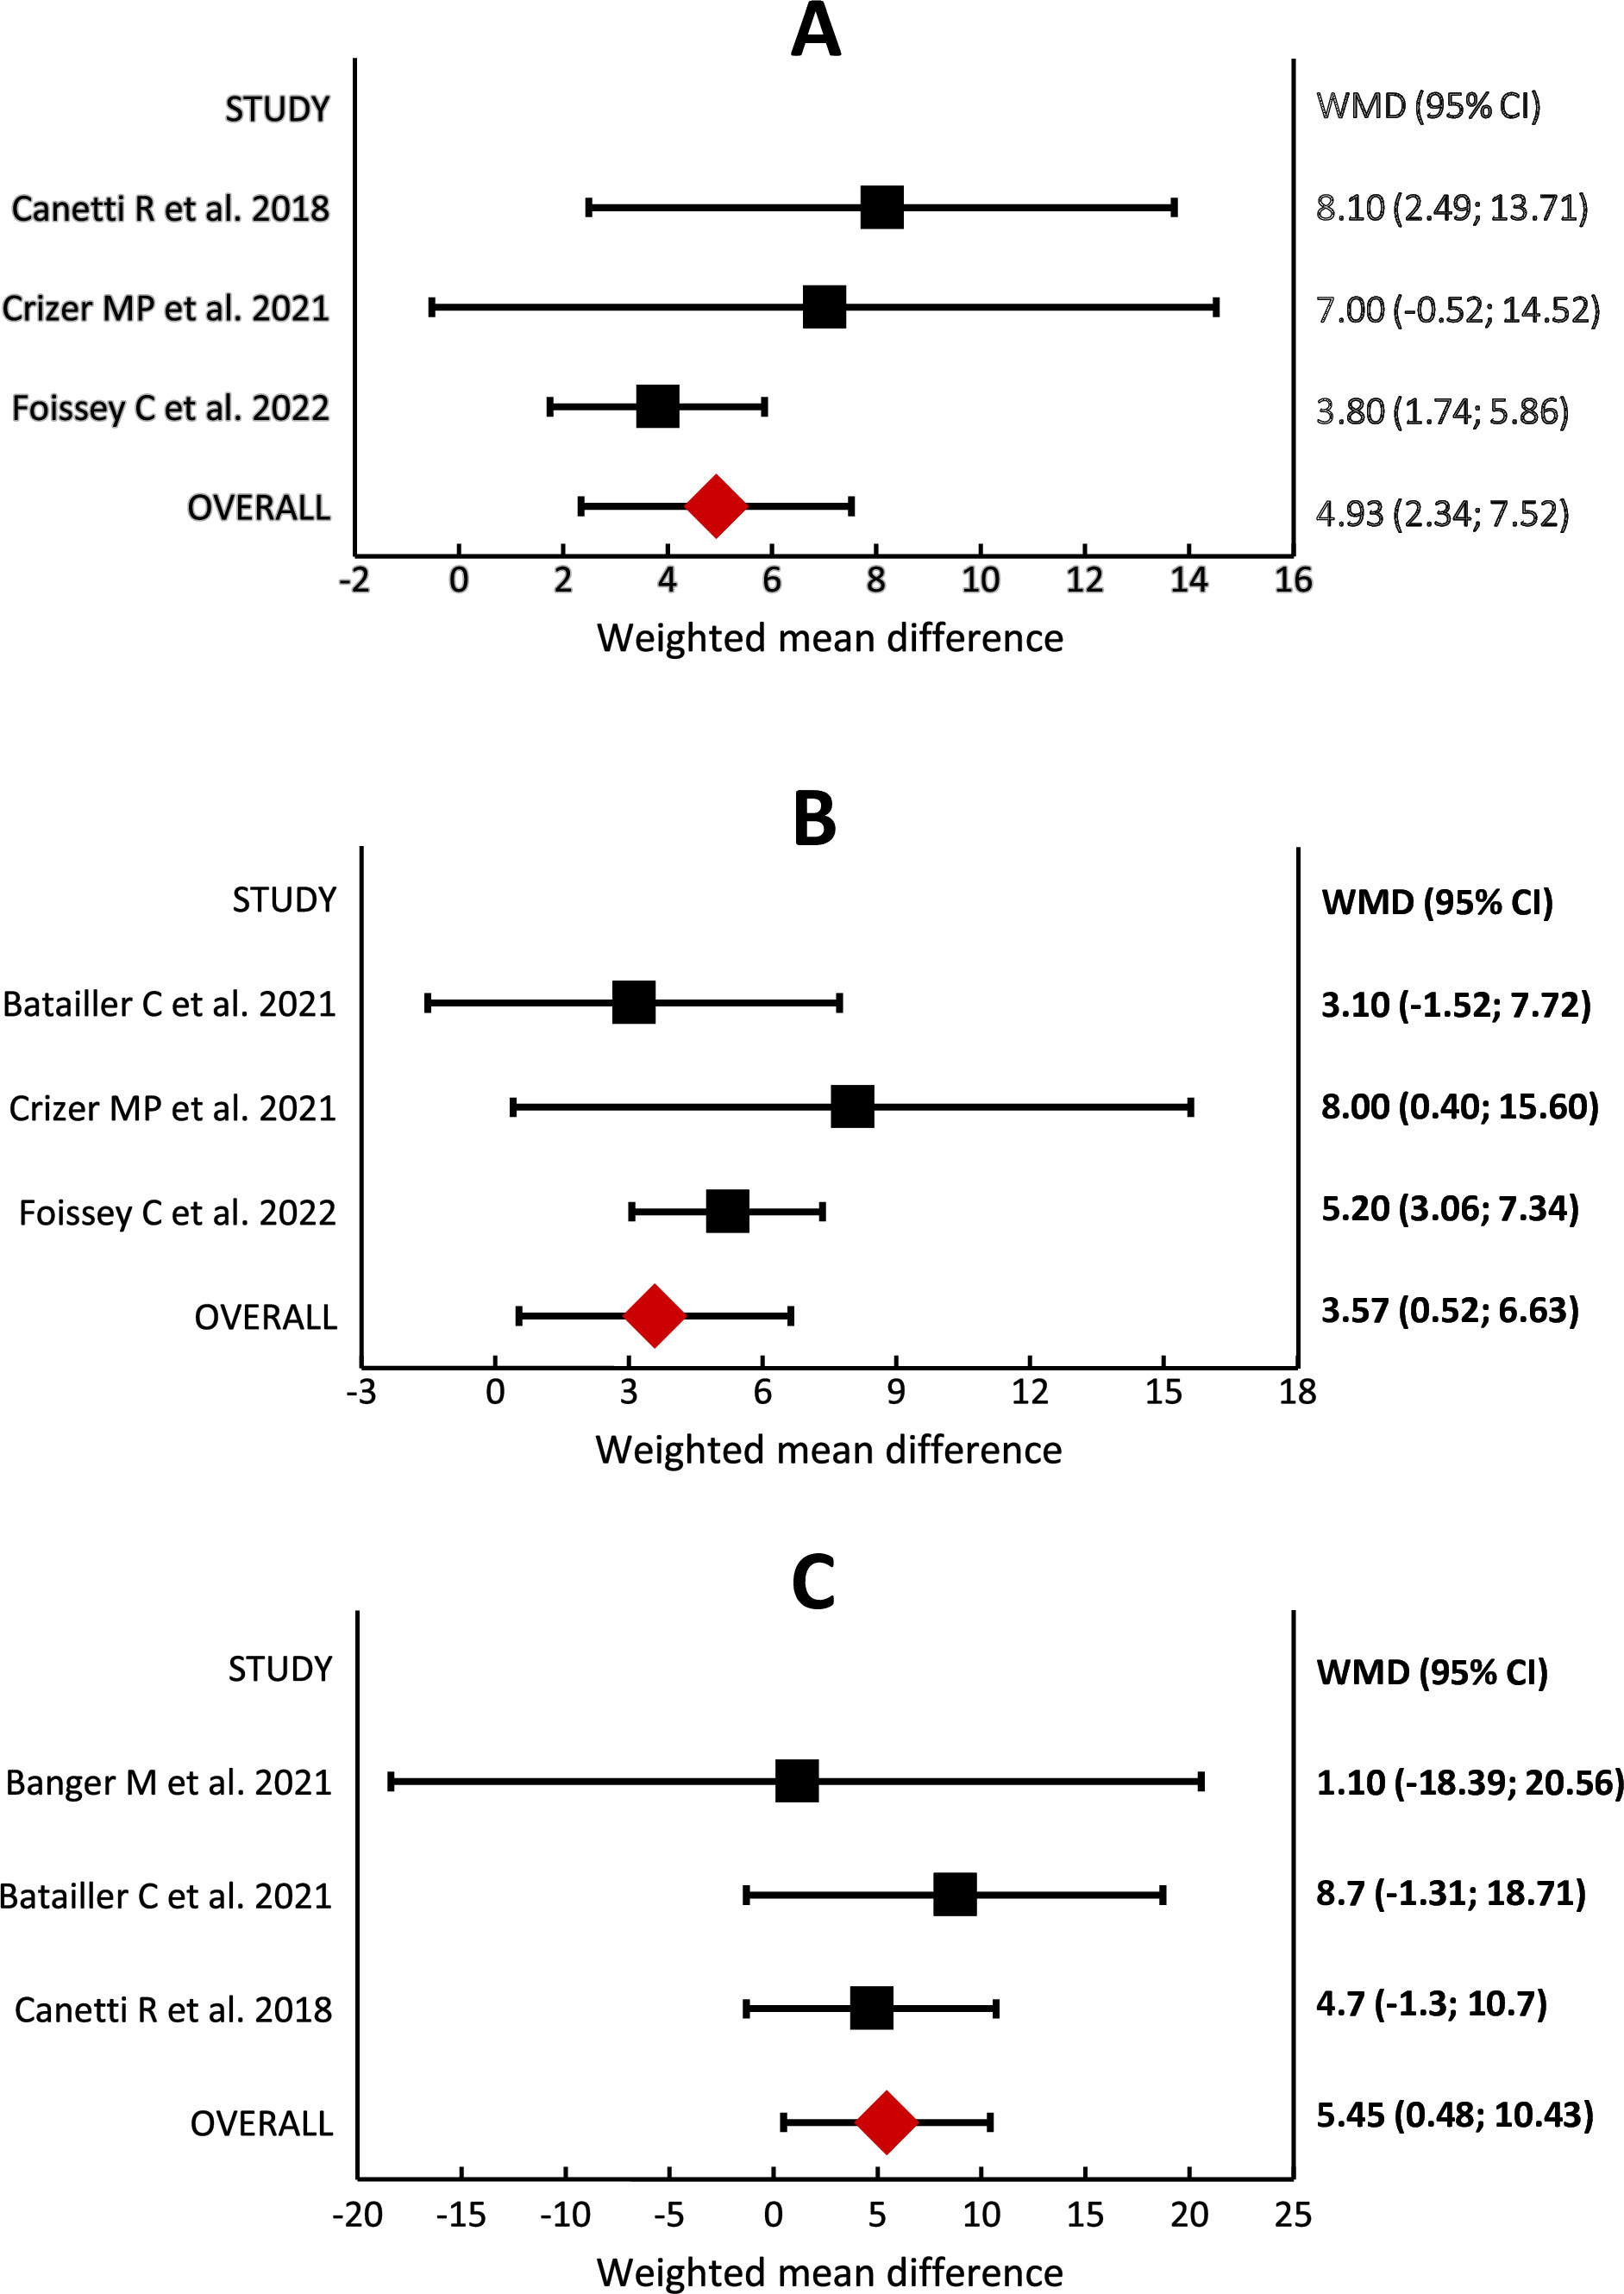 Fig. 4 
            a) Knee Society Score (KSS): forest plot of the individual studies and weighted mean difference (WMD) for KSS improvement, including a 95% confidence interval (CI). The size of the squares shows the weight of the study. Robotic-assisted unicompartmental knee arthroplasty (R-UKA) showed better KSS values compared to conventional UKA (C-UKA) (p < 0.001). b) KSS, medial UKA subgroup: forest plot of the individual studies and WMD for KSS improvement, including a 95% CI. The size of the squares shows the weight of the study. R-UKA showed better KSS values compared to C-UKA (p = 0.022). c) Forgotten Joint Score (FJS): forest plot of the individual studies and WMD for FJS values, including a 95% CI. The size of the squares shows the weight of the study. R-UKA showed better FJS values compared to C-UKA (p = 0.022).
          